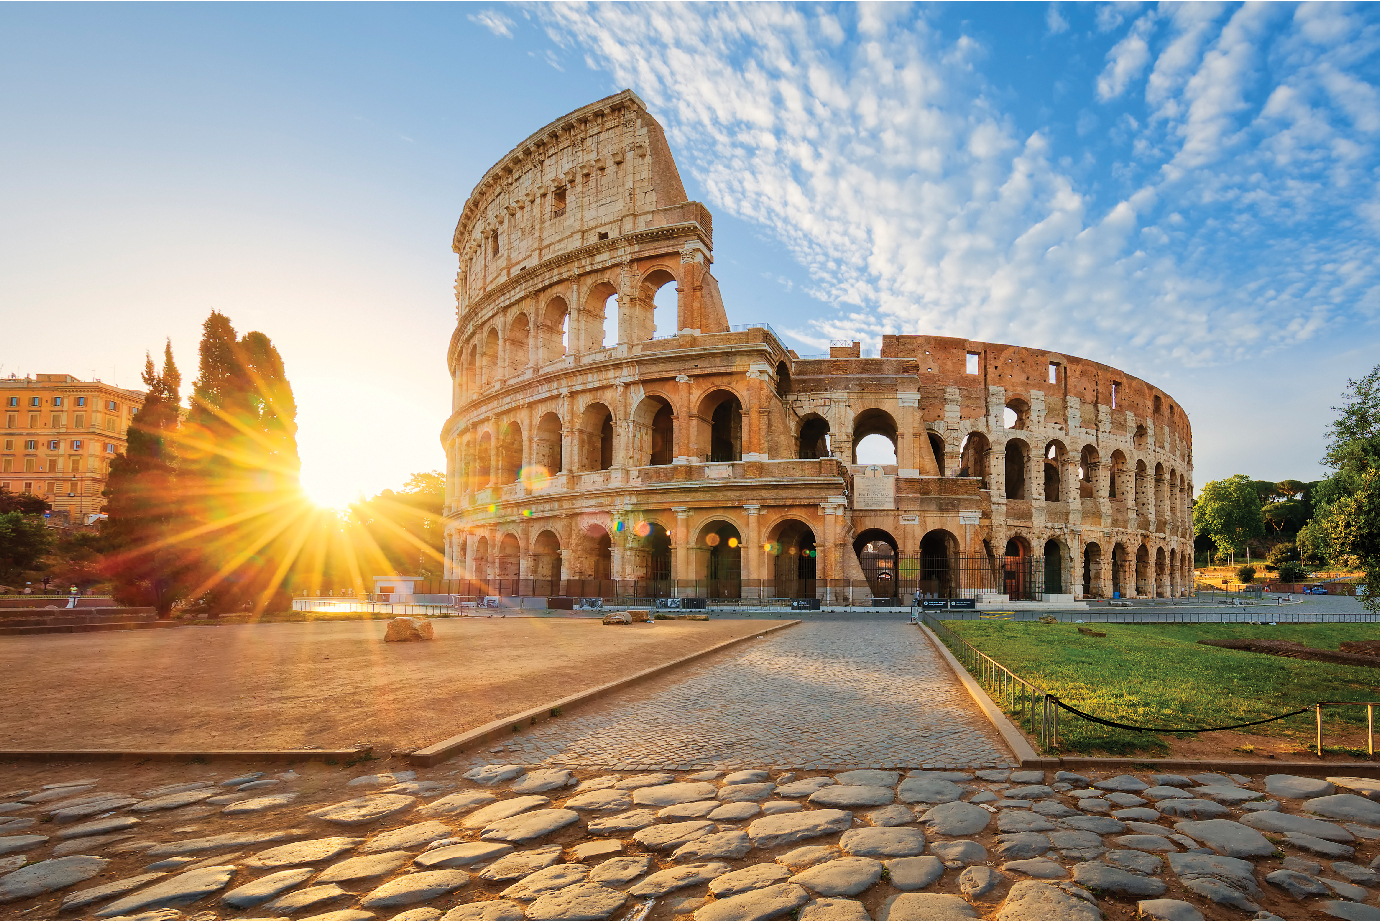 A picture of the Coliseum in Rome